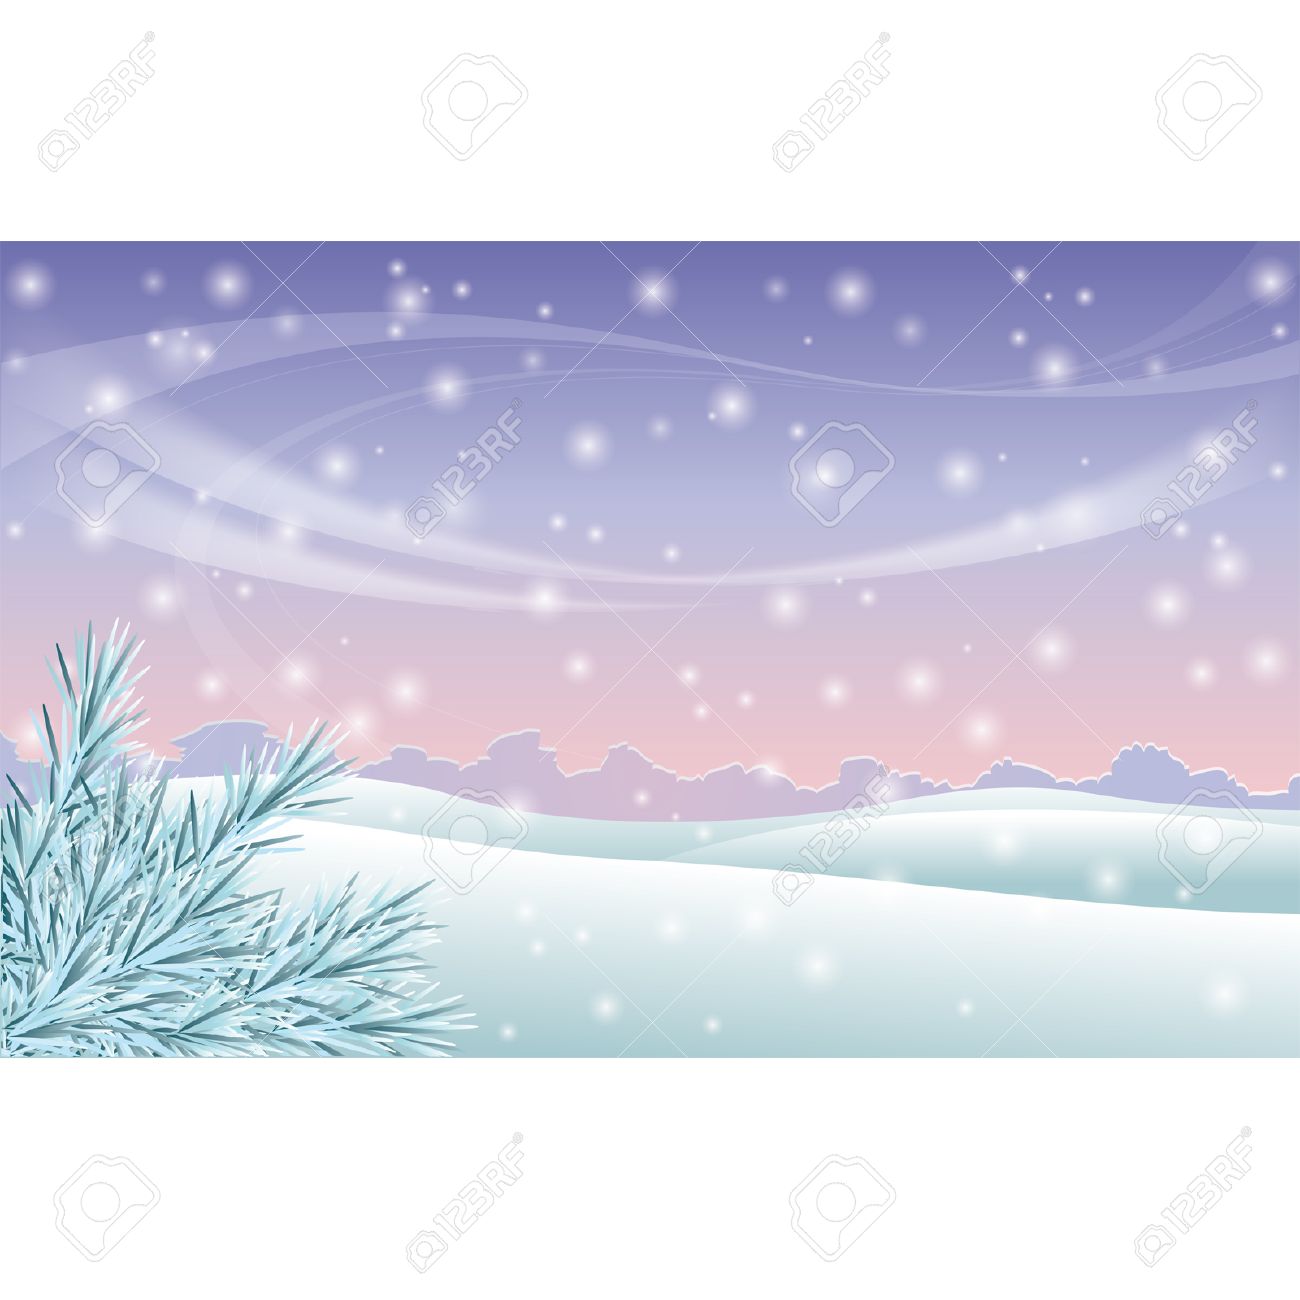 Winter Scene Background With Trees On A Snowy Hillside